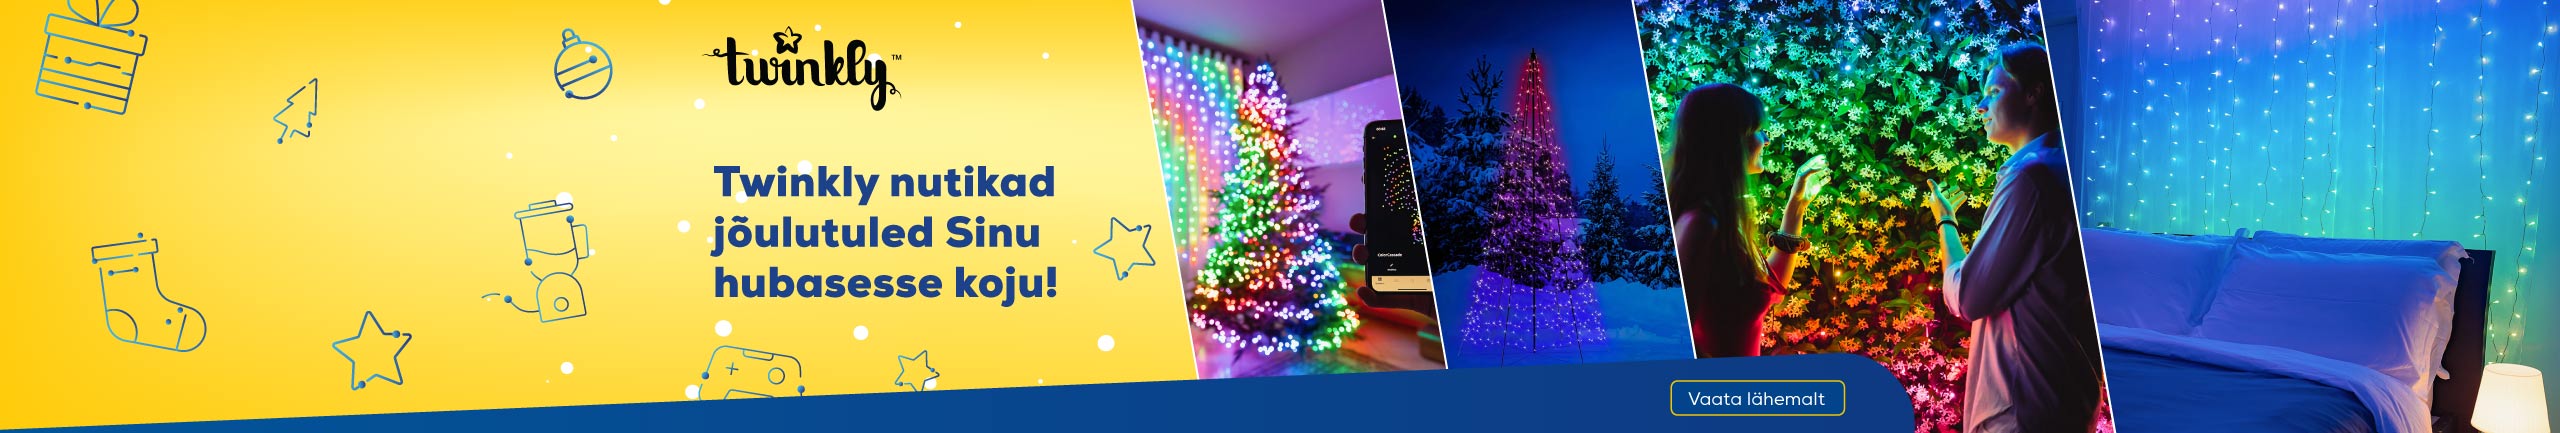 Twinkly smart lights for Your cozy home!